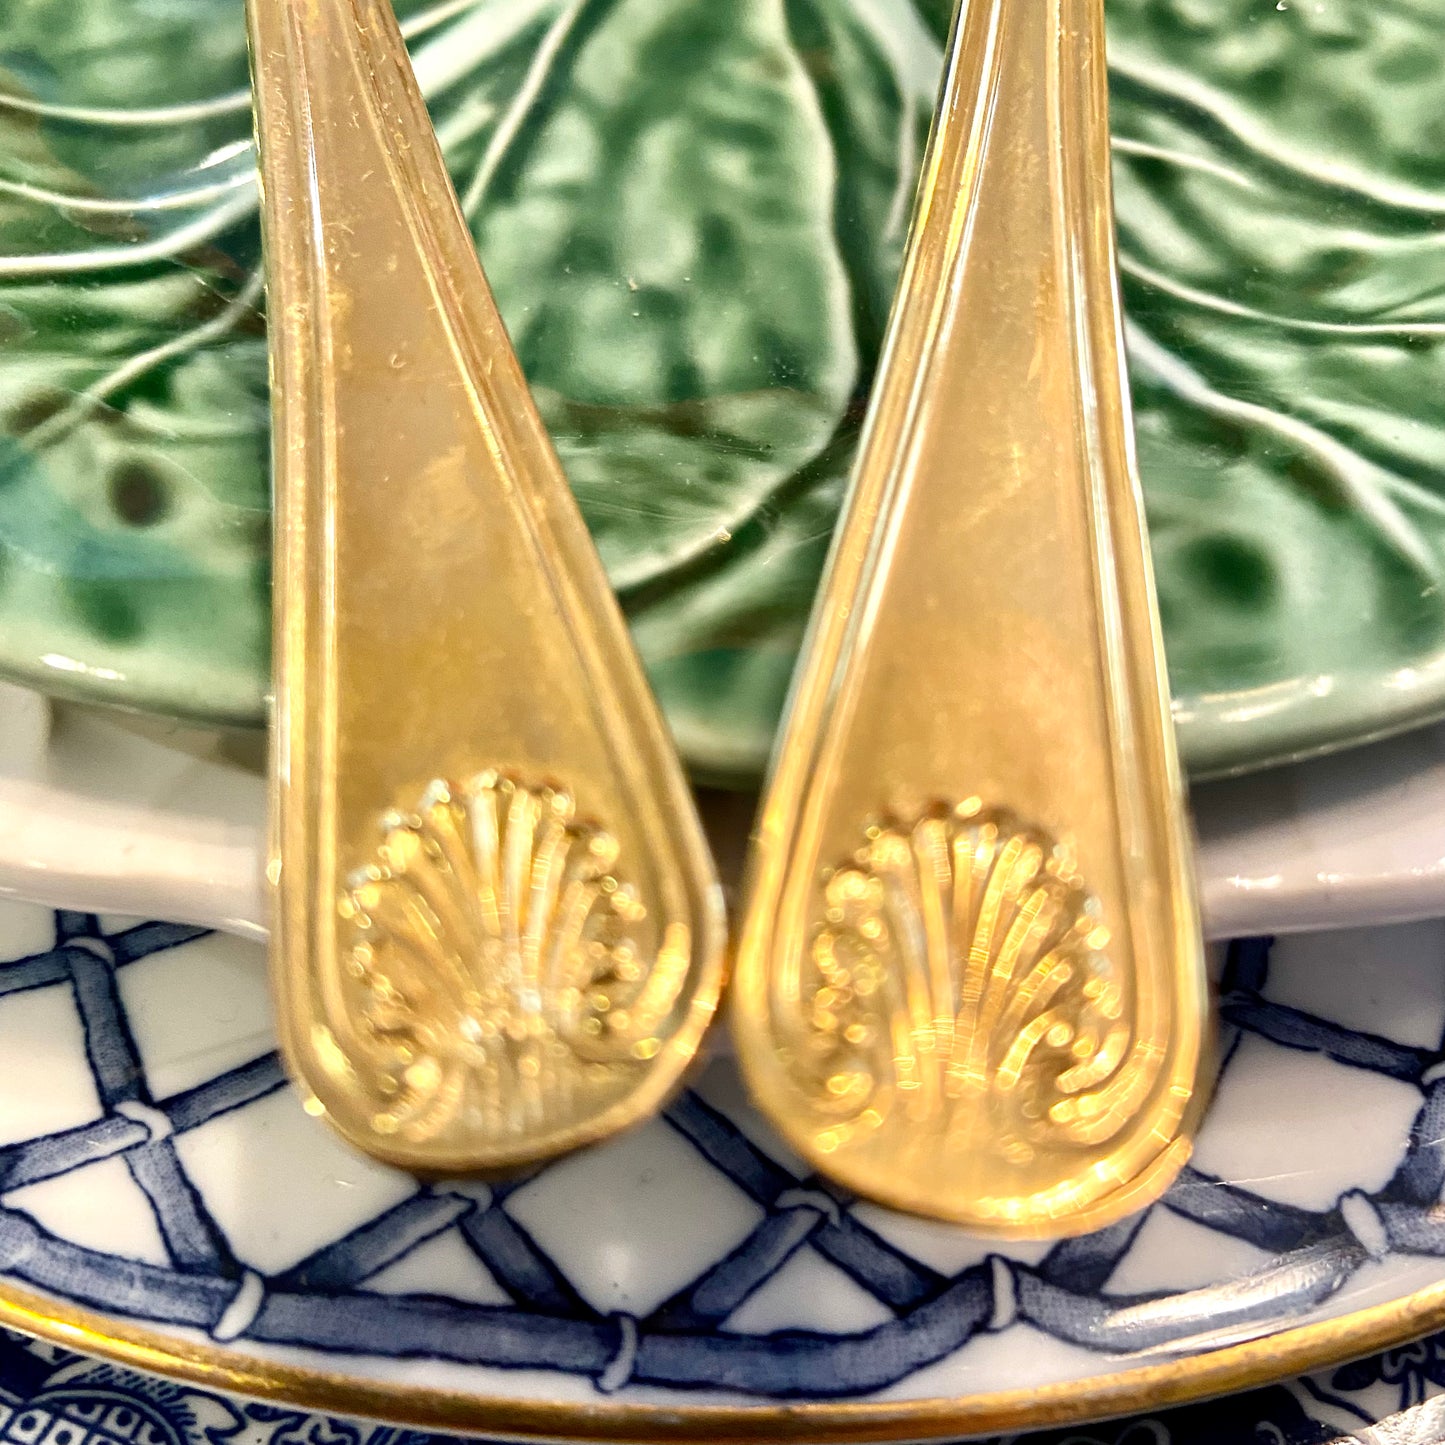 Set of 2 shiny brass serving pieces by designer Sheffield of England